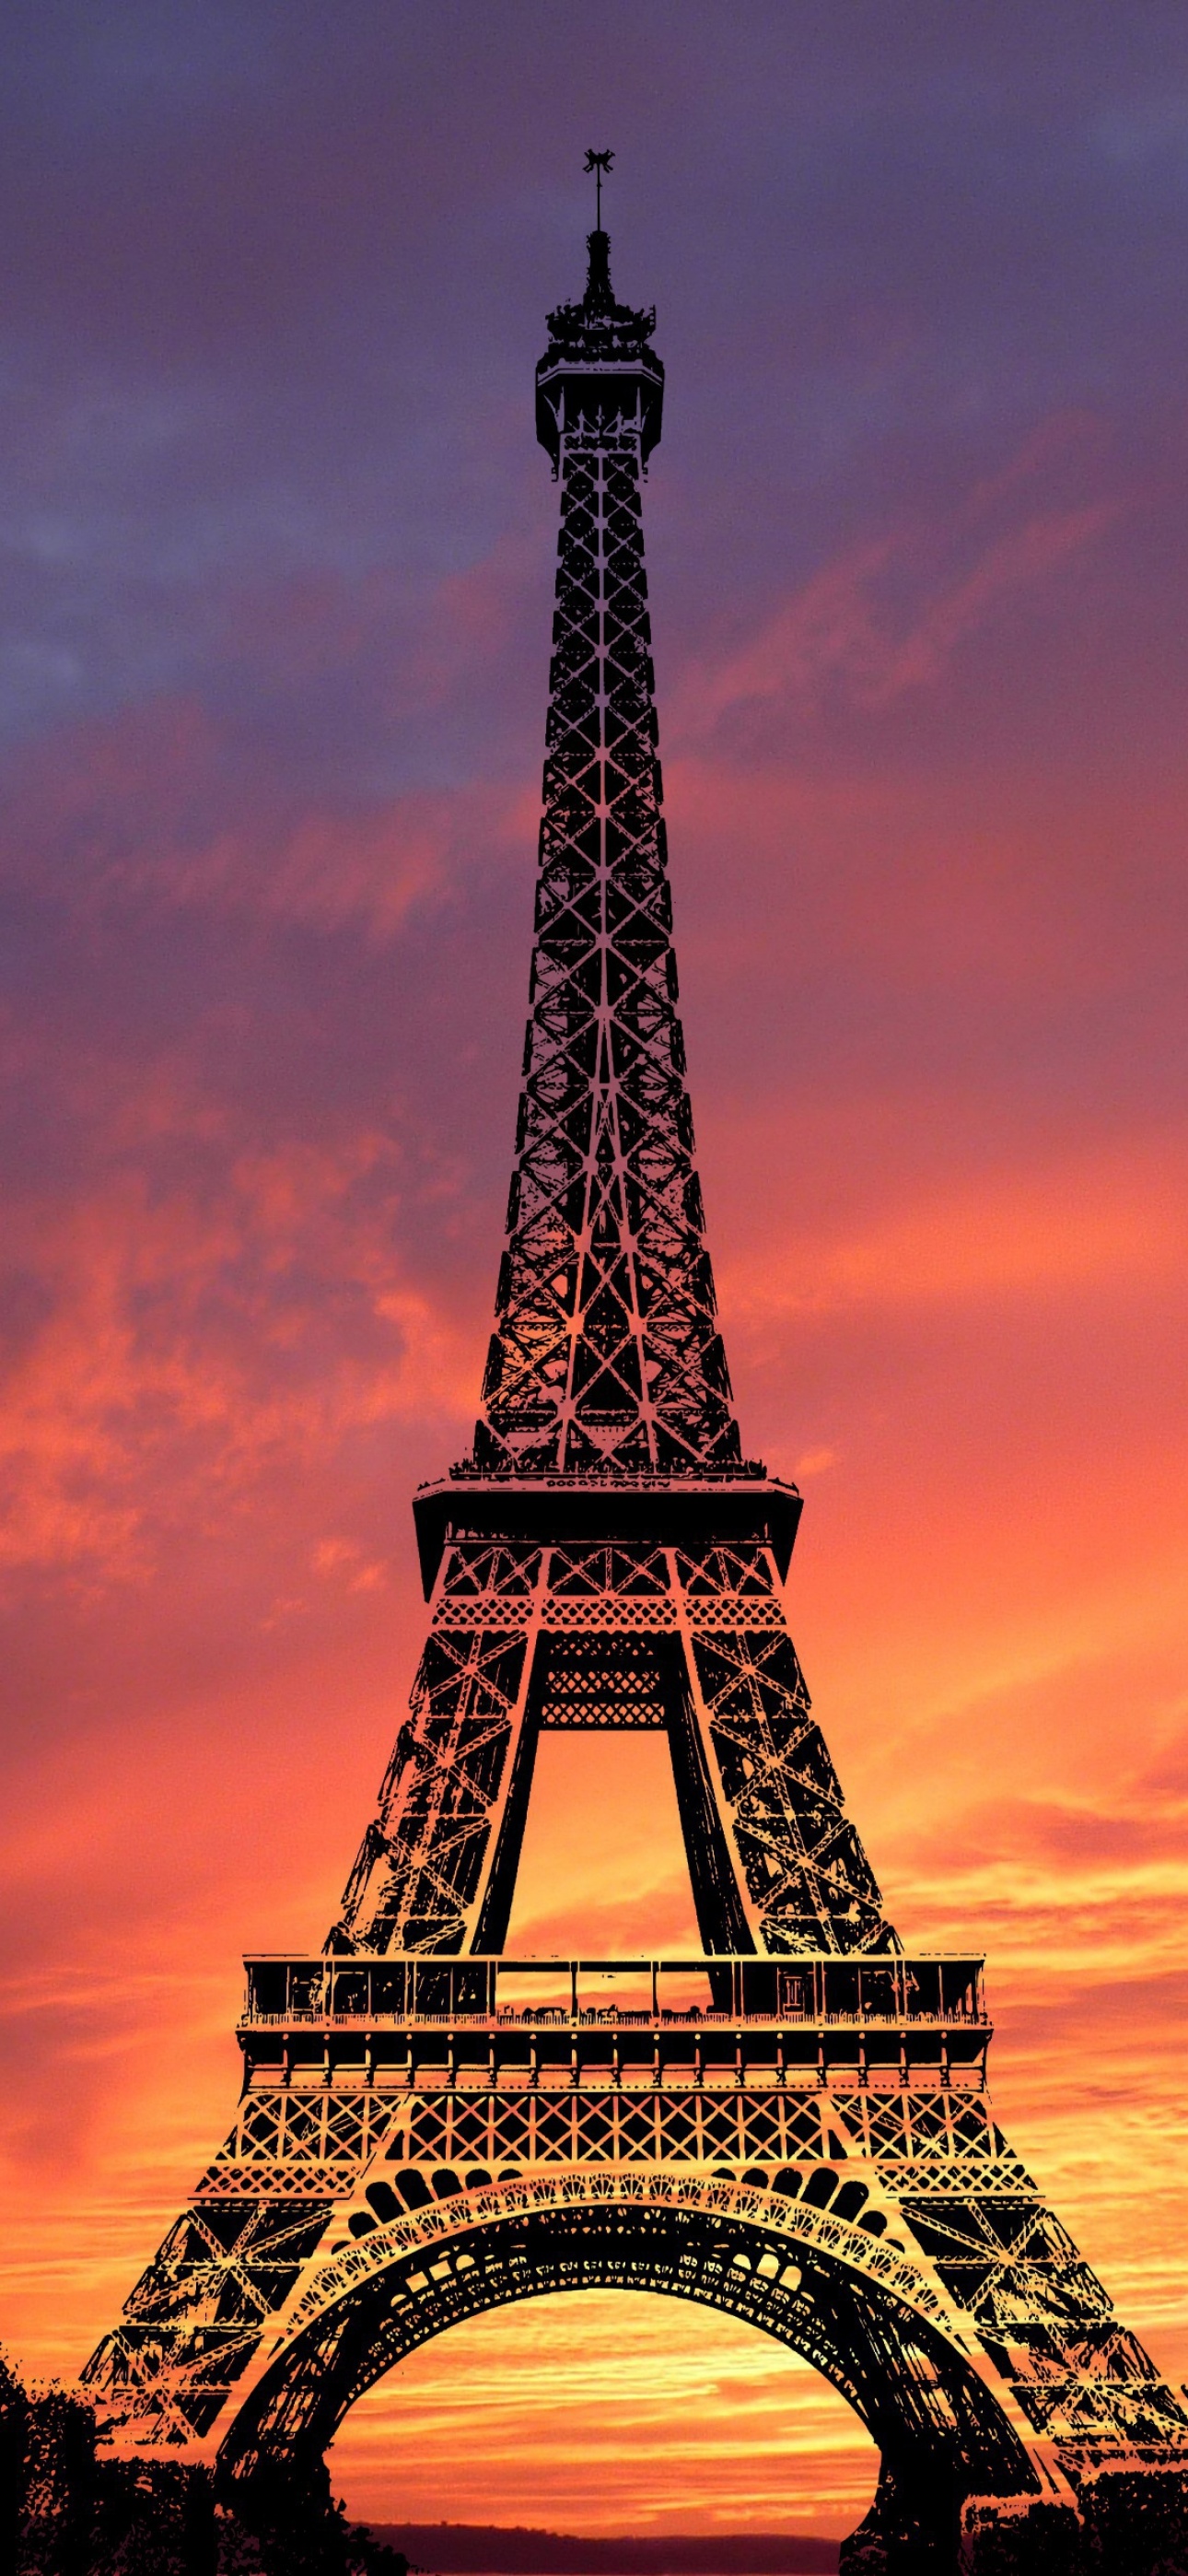 Eiffel Tower wallpaper for iPhone. Download the best Paris wallpaper for iPhone. - Eiffel Tower